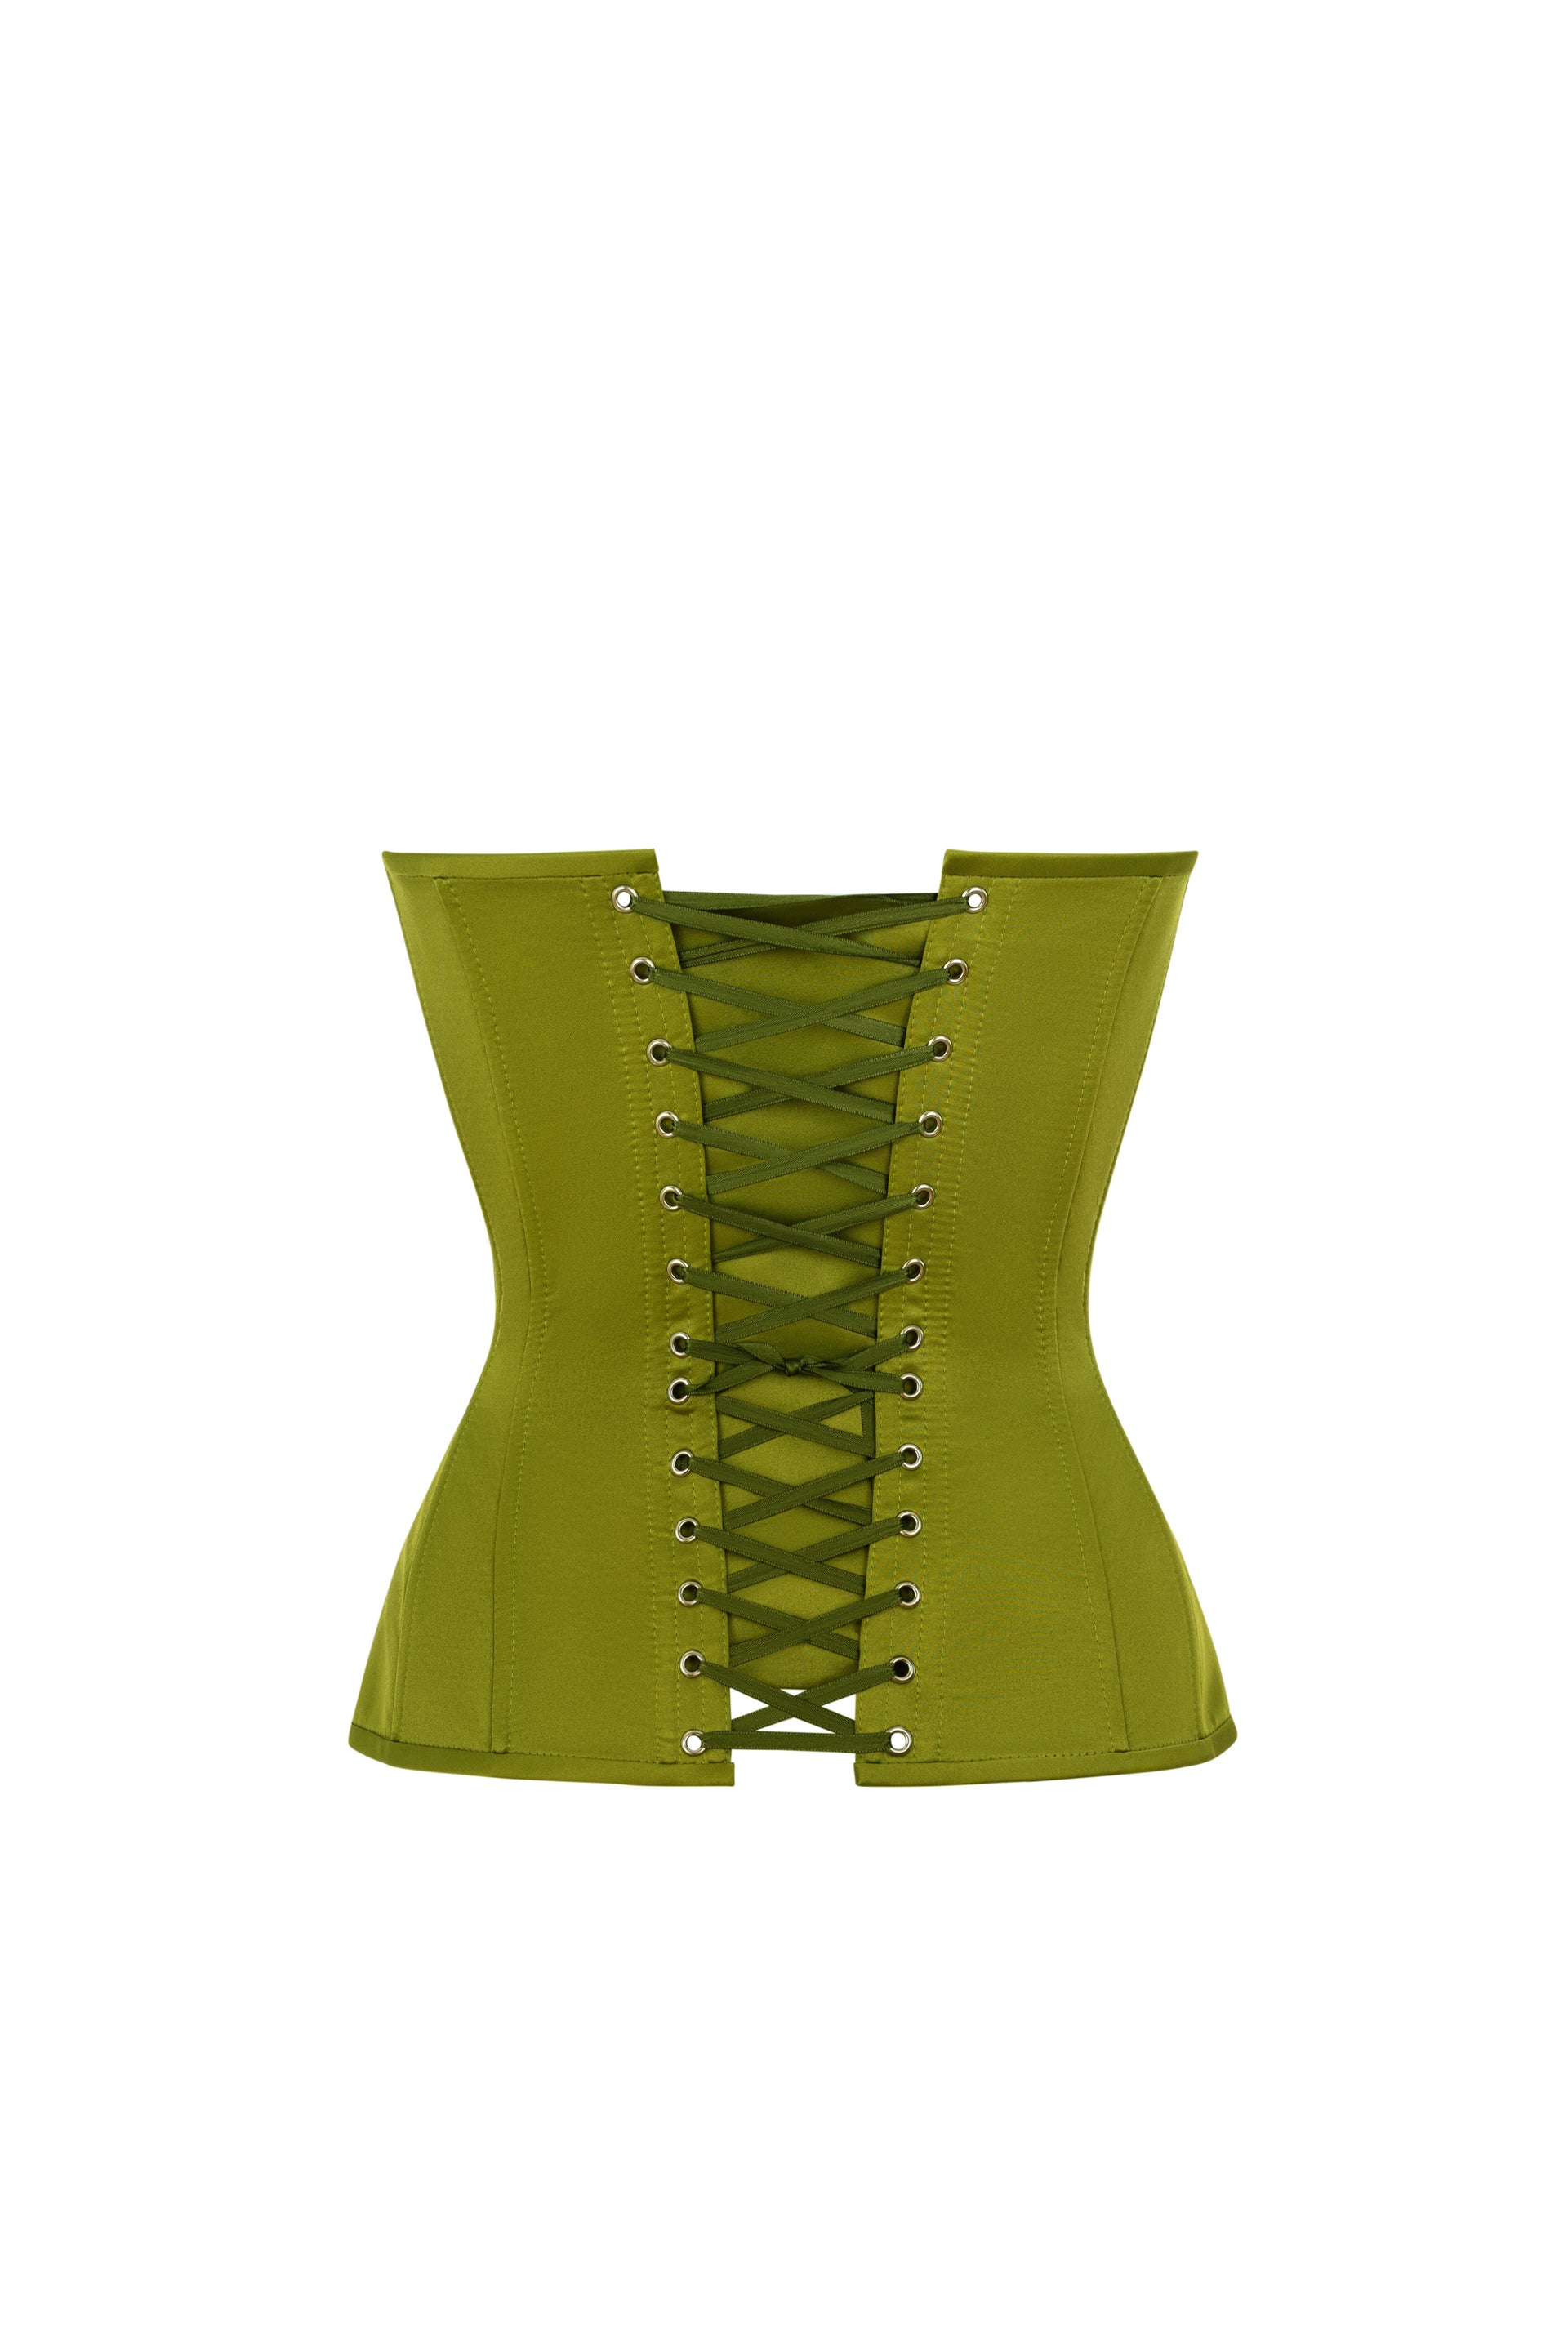 Olive satin corset with cups